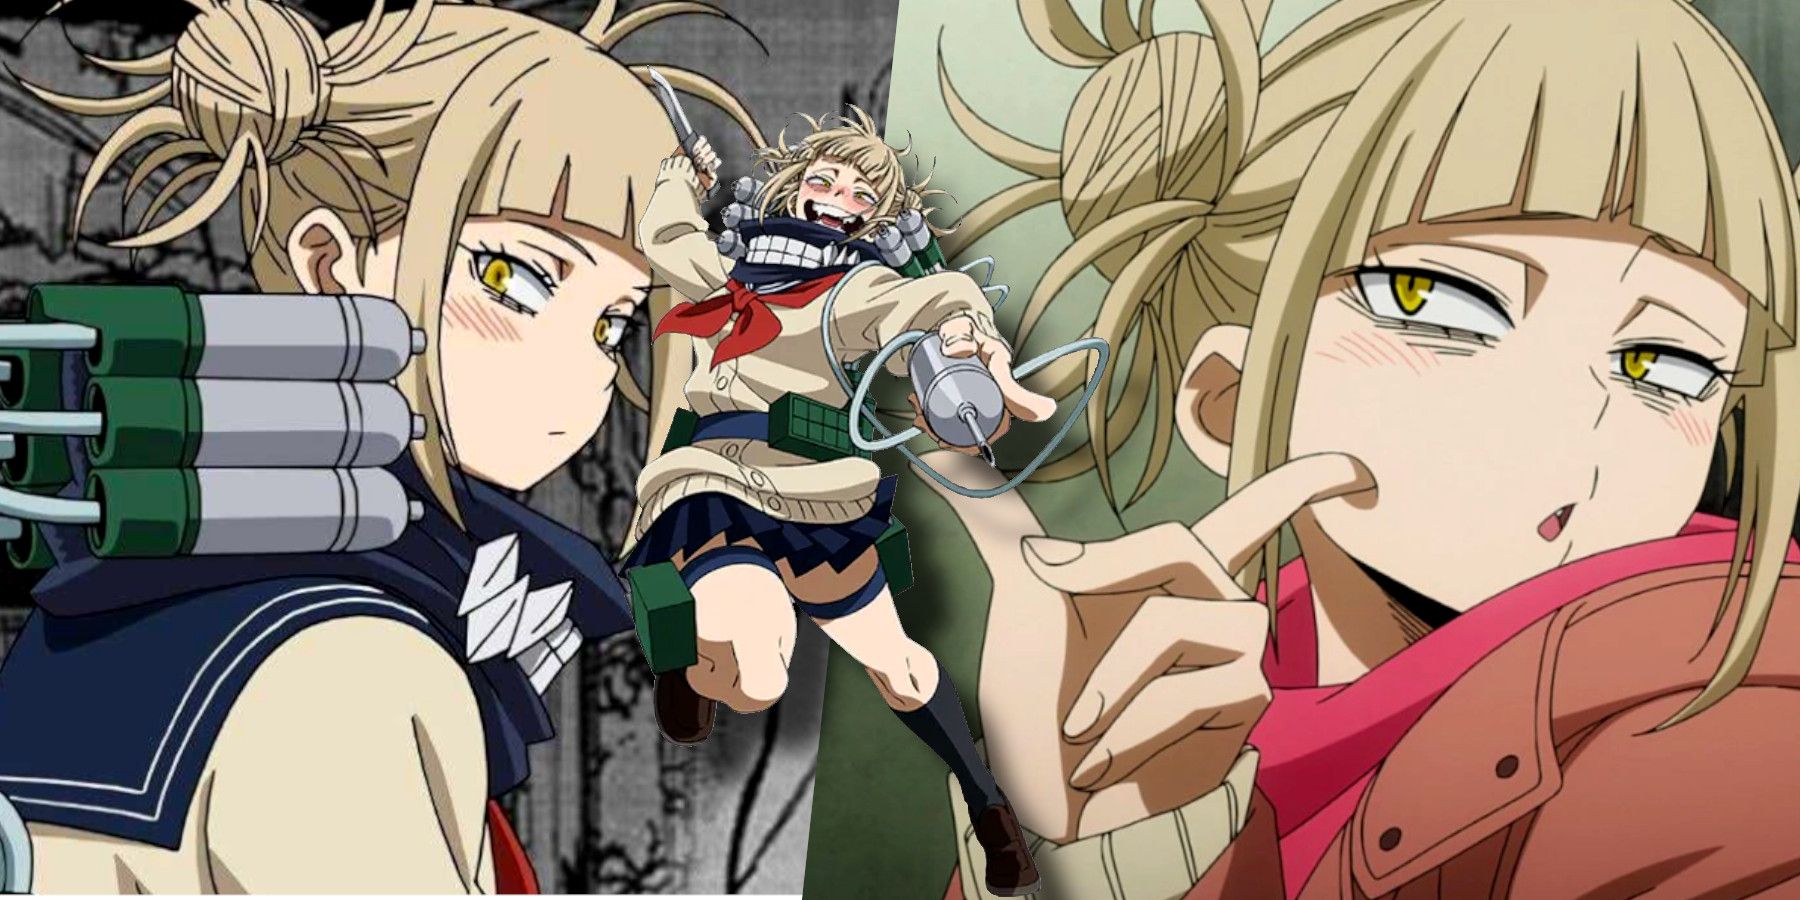 How old is Toga from My Hero Academia?